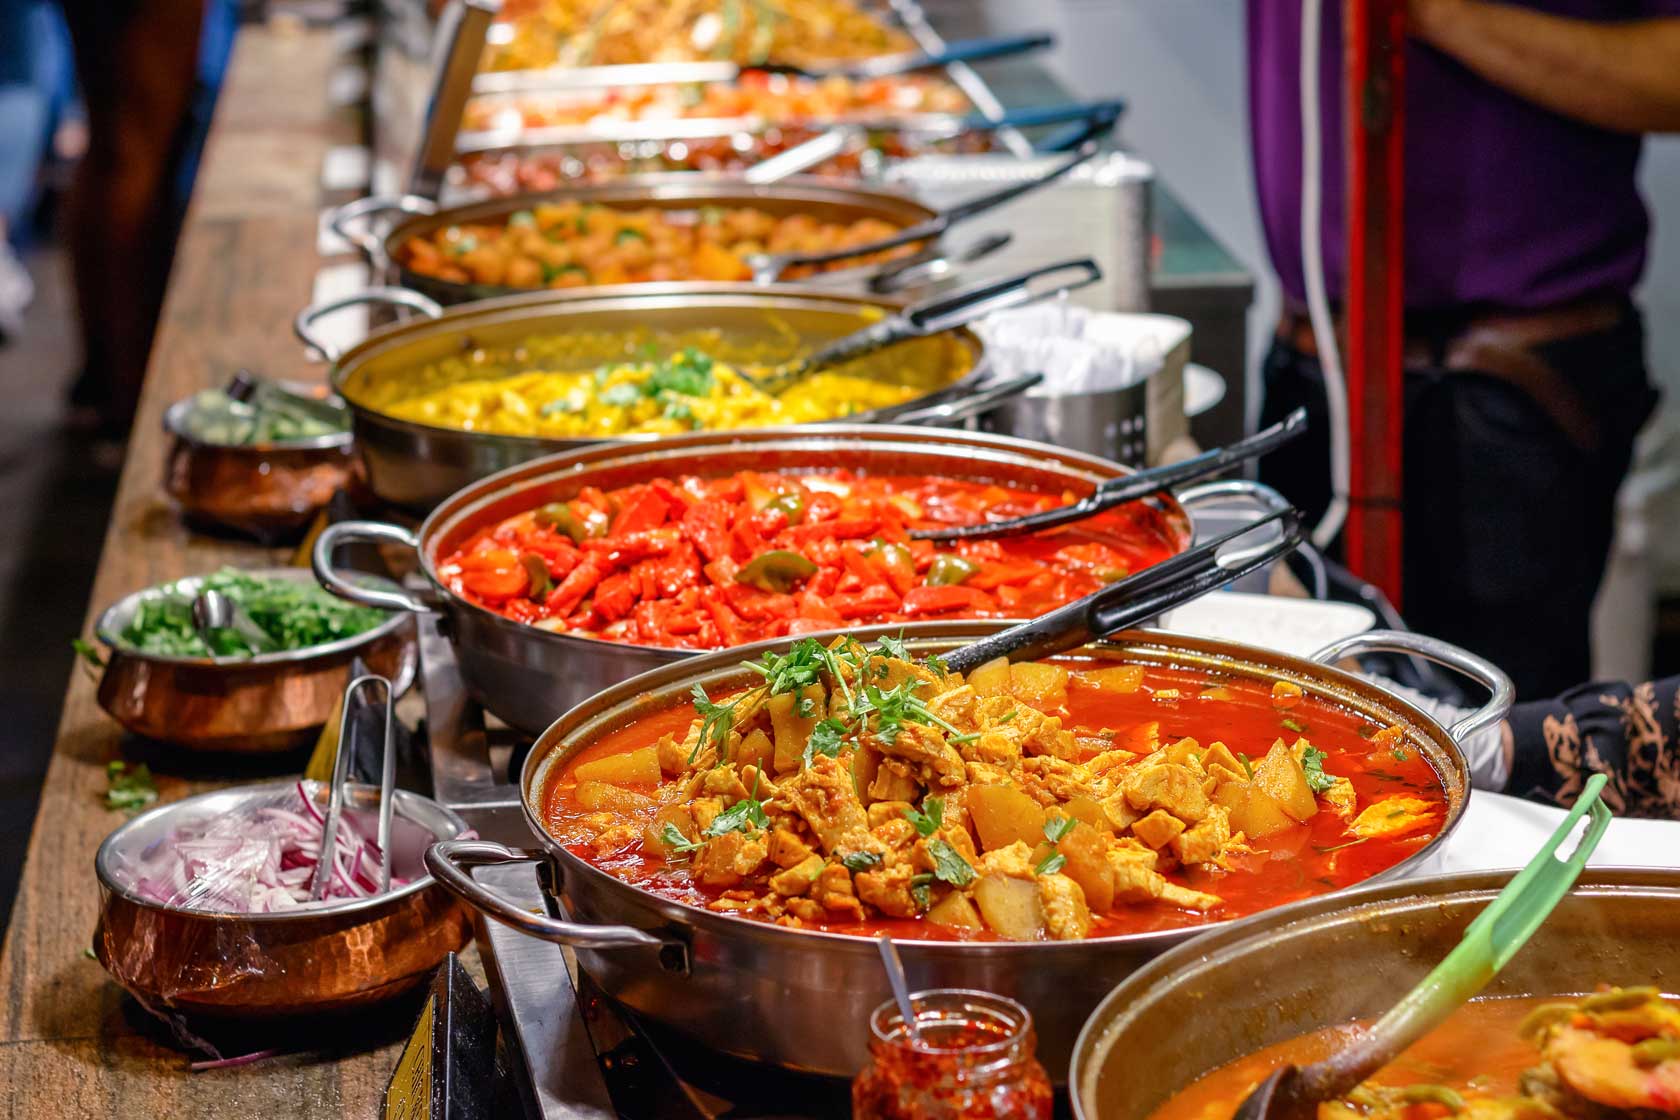 Cooked curries on display at Camden Market in London